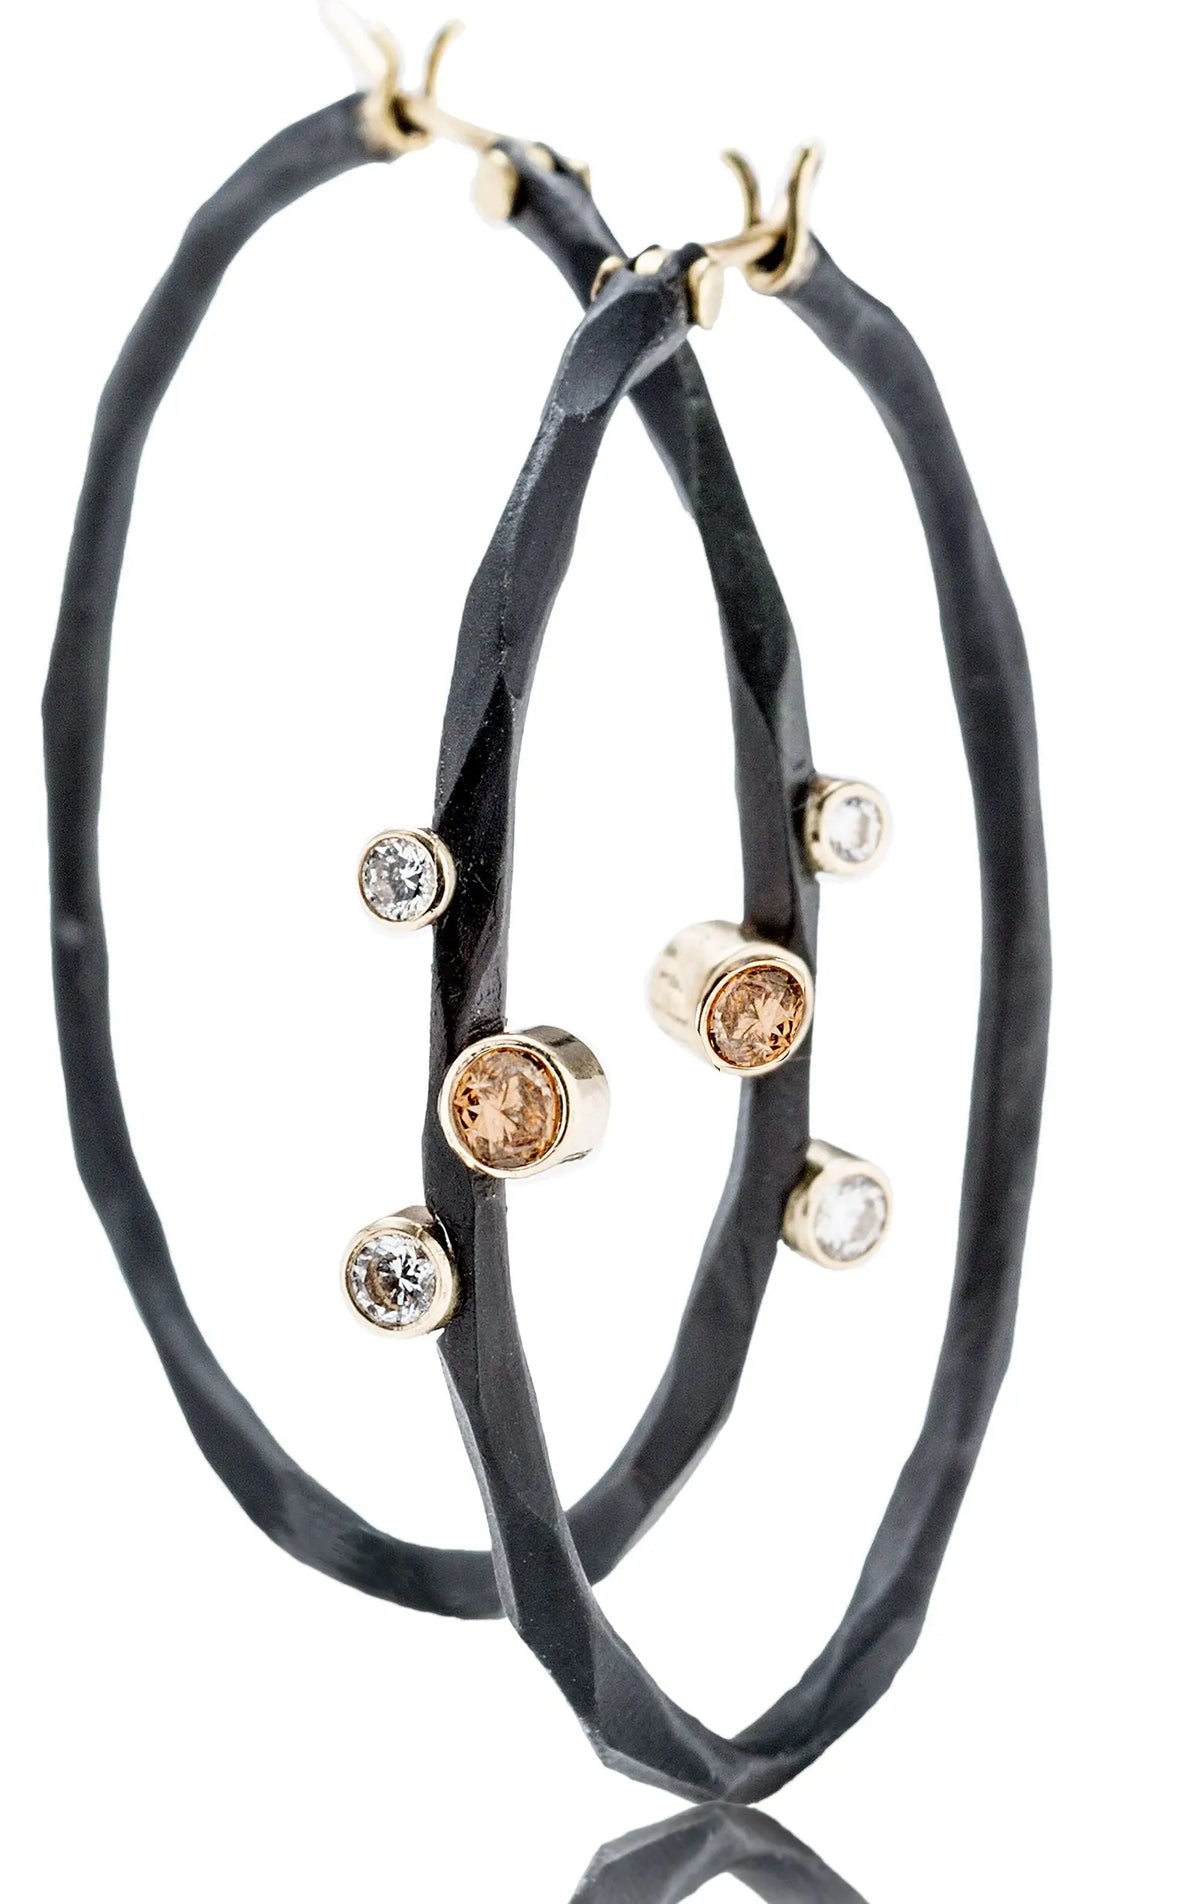 Blackened cobalt chrome and 18kt gold hoop earrings with .06ctw of white brilliants and .14ctw of cognac diamonds. Great hoops!